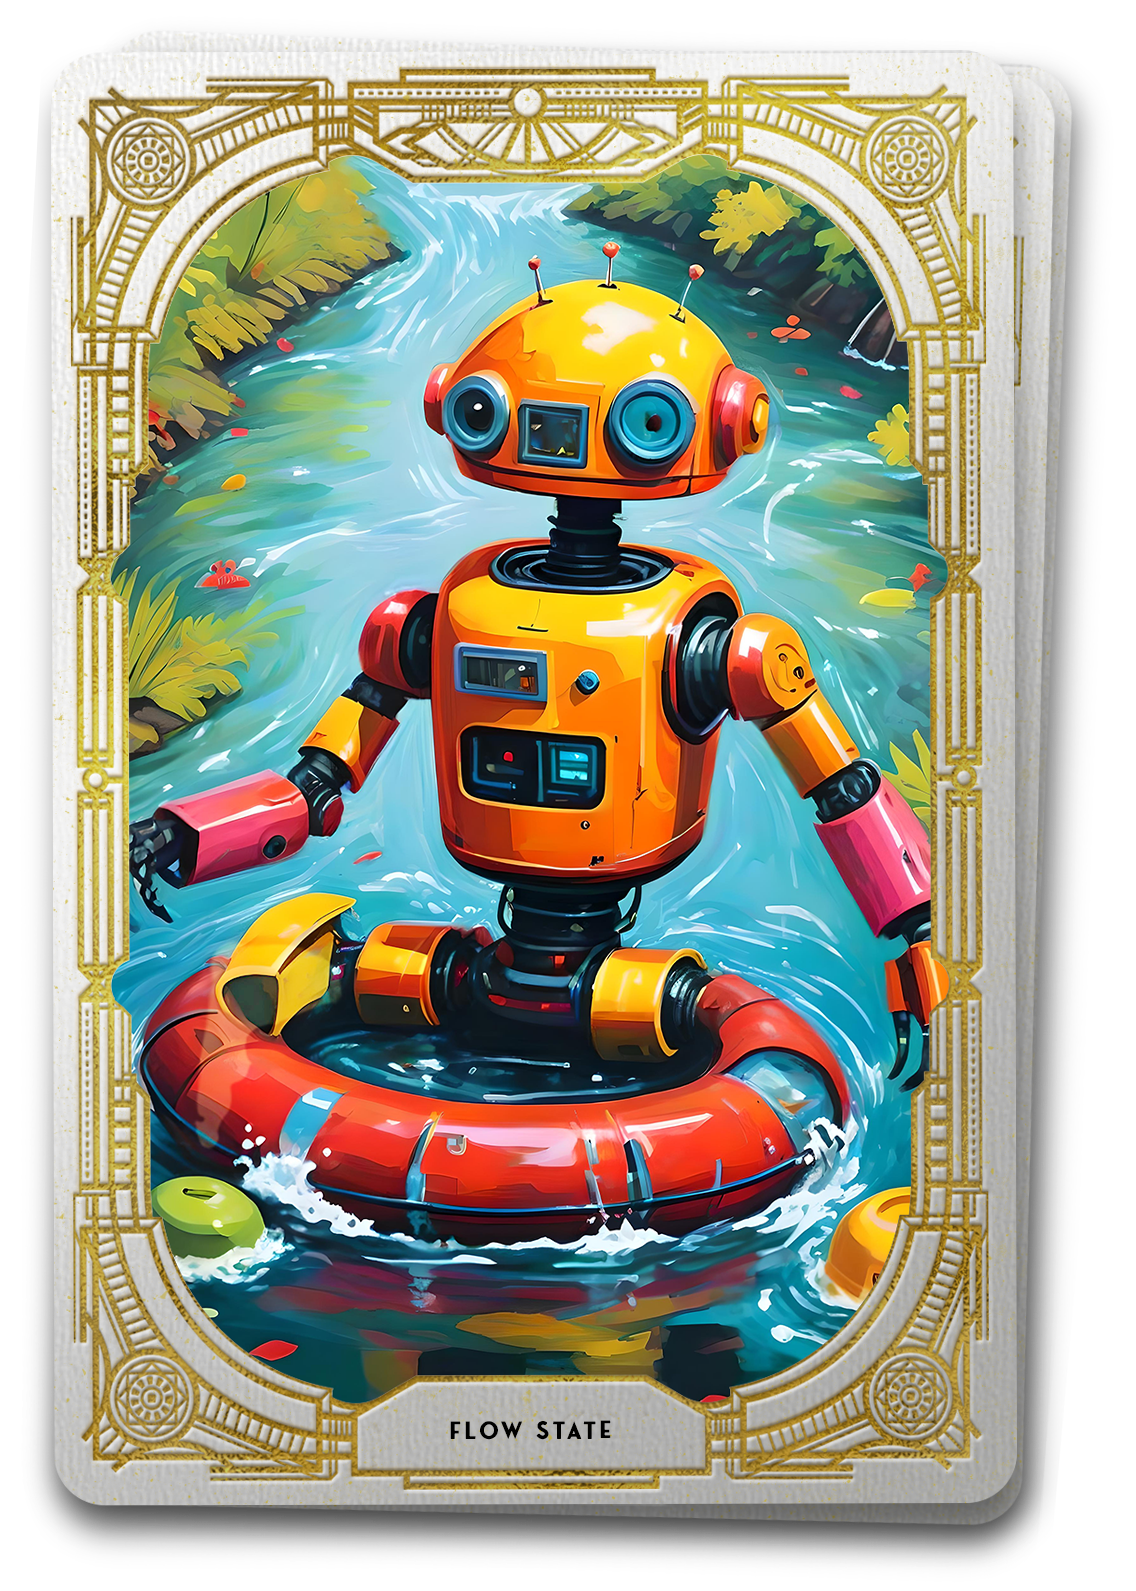 Illustration of a robot enjoying a leisurely float down a lush flowing river symbolic of the concept of Flow state in UX design.